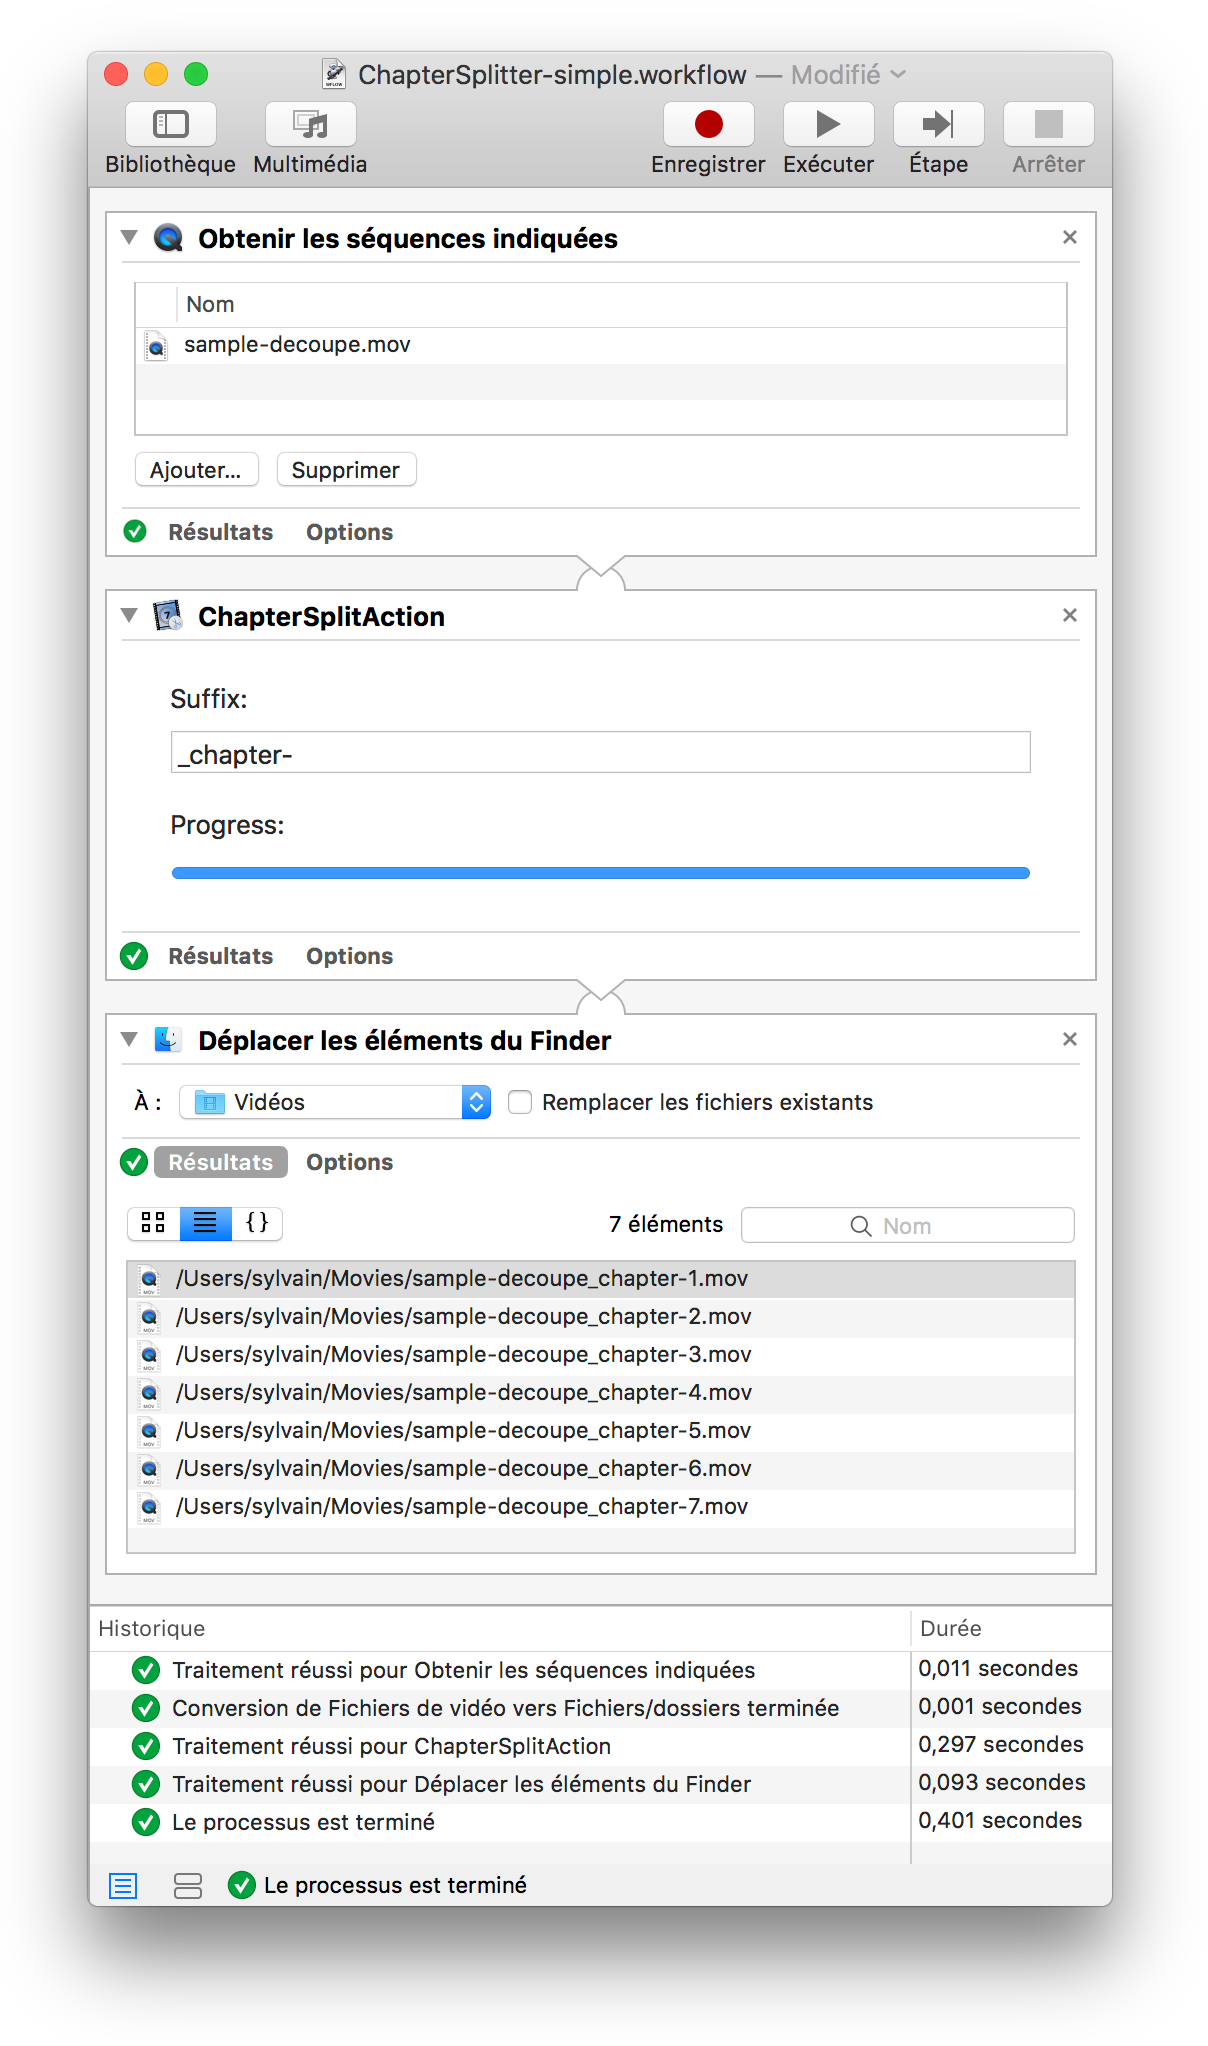 An Automator action simple to configure and to integrate into your processes.